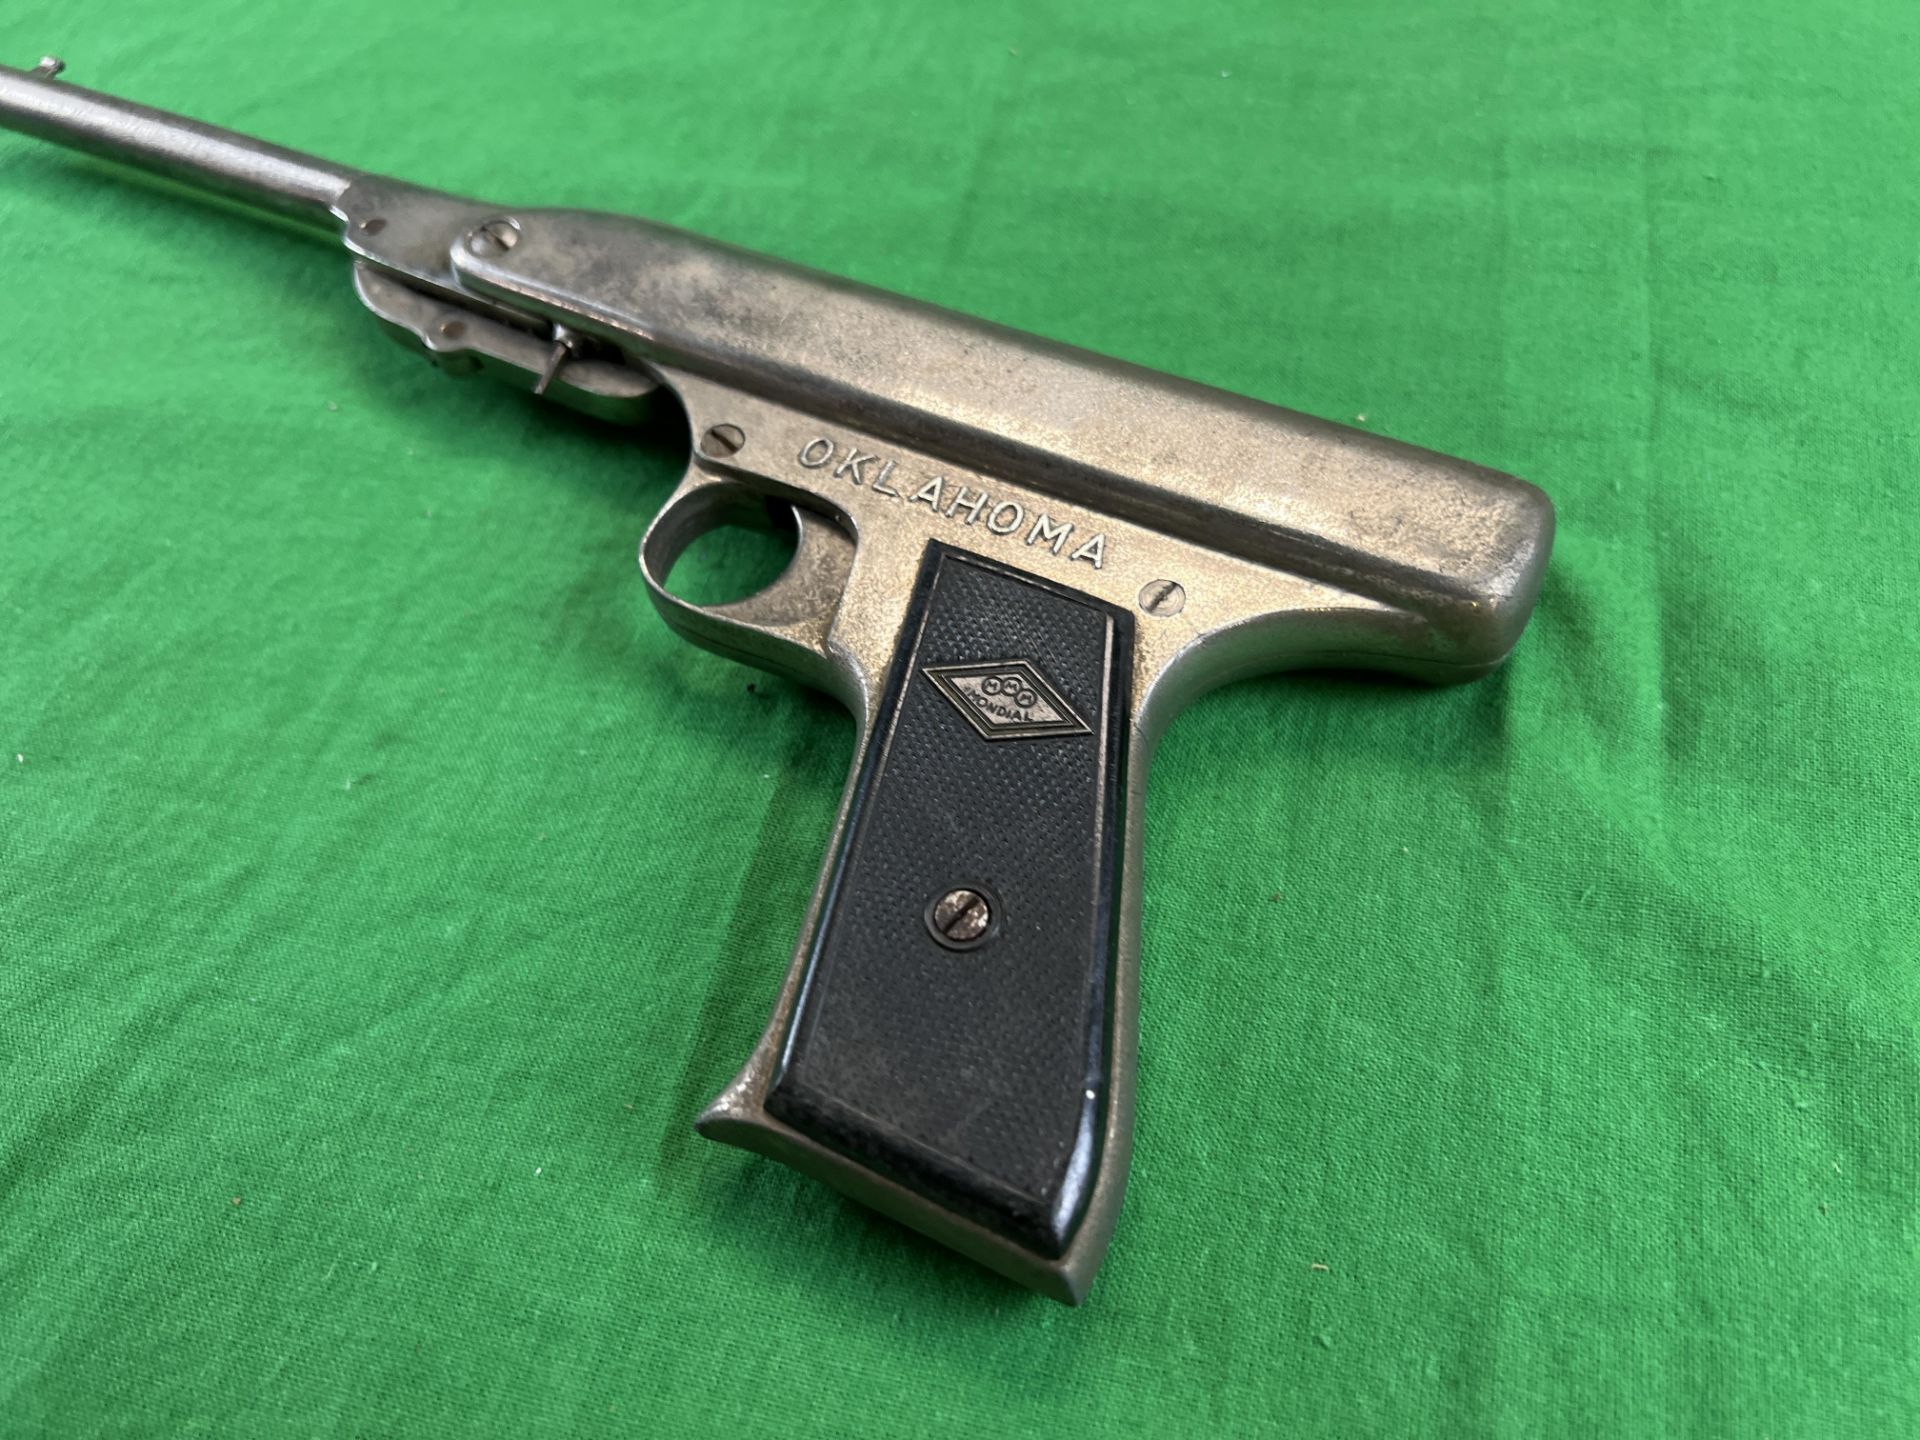 OKLAHOMA MONDIAL VINTAGE ITALIAN AIR PISTOL - NO POSTAGE OR PACKING AVAILABLE - Image 8 of 9